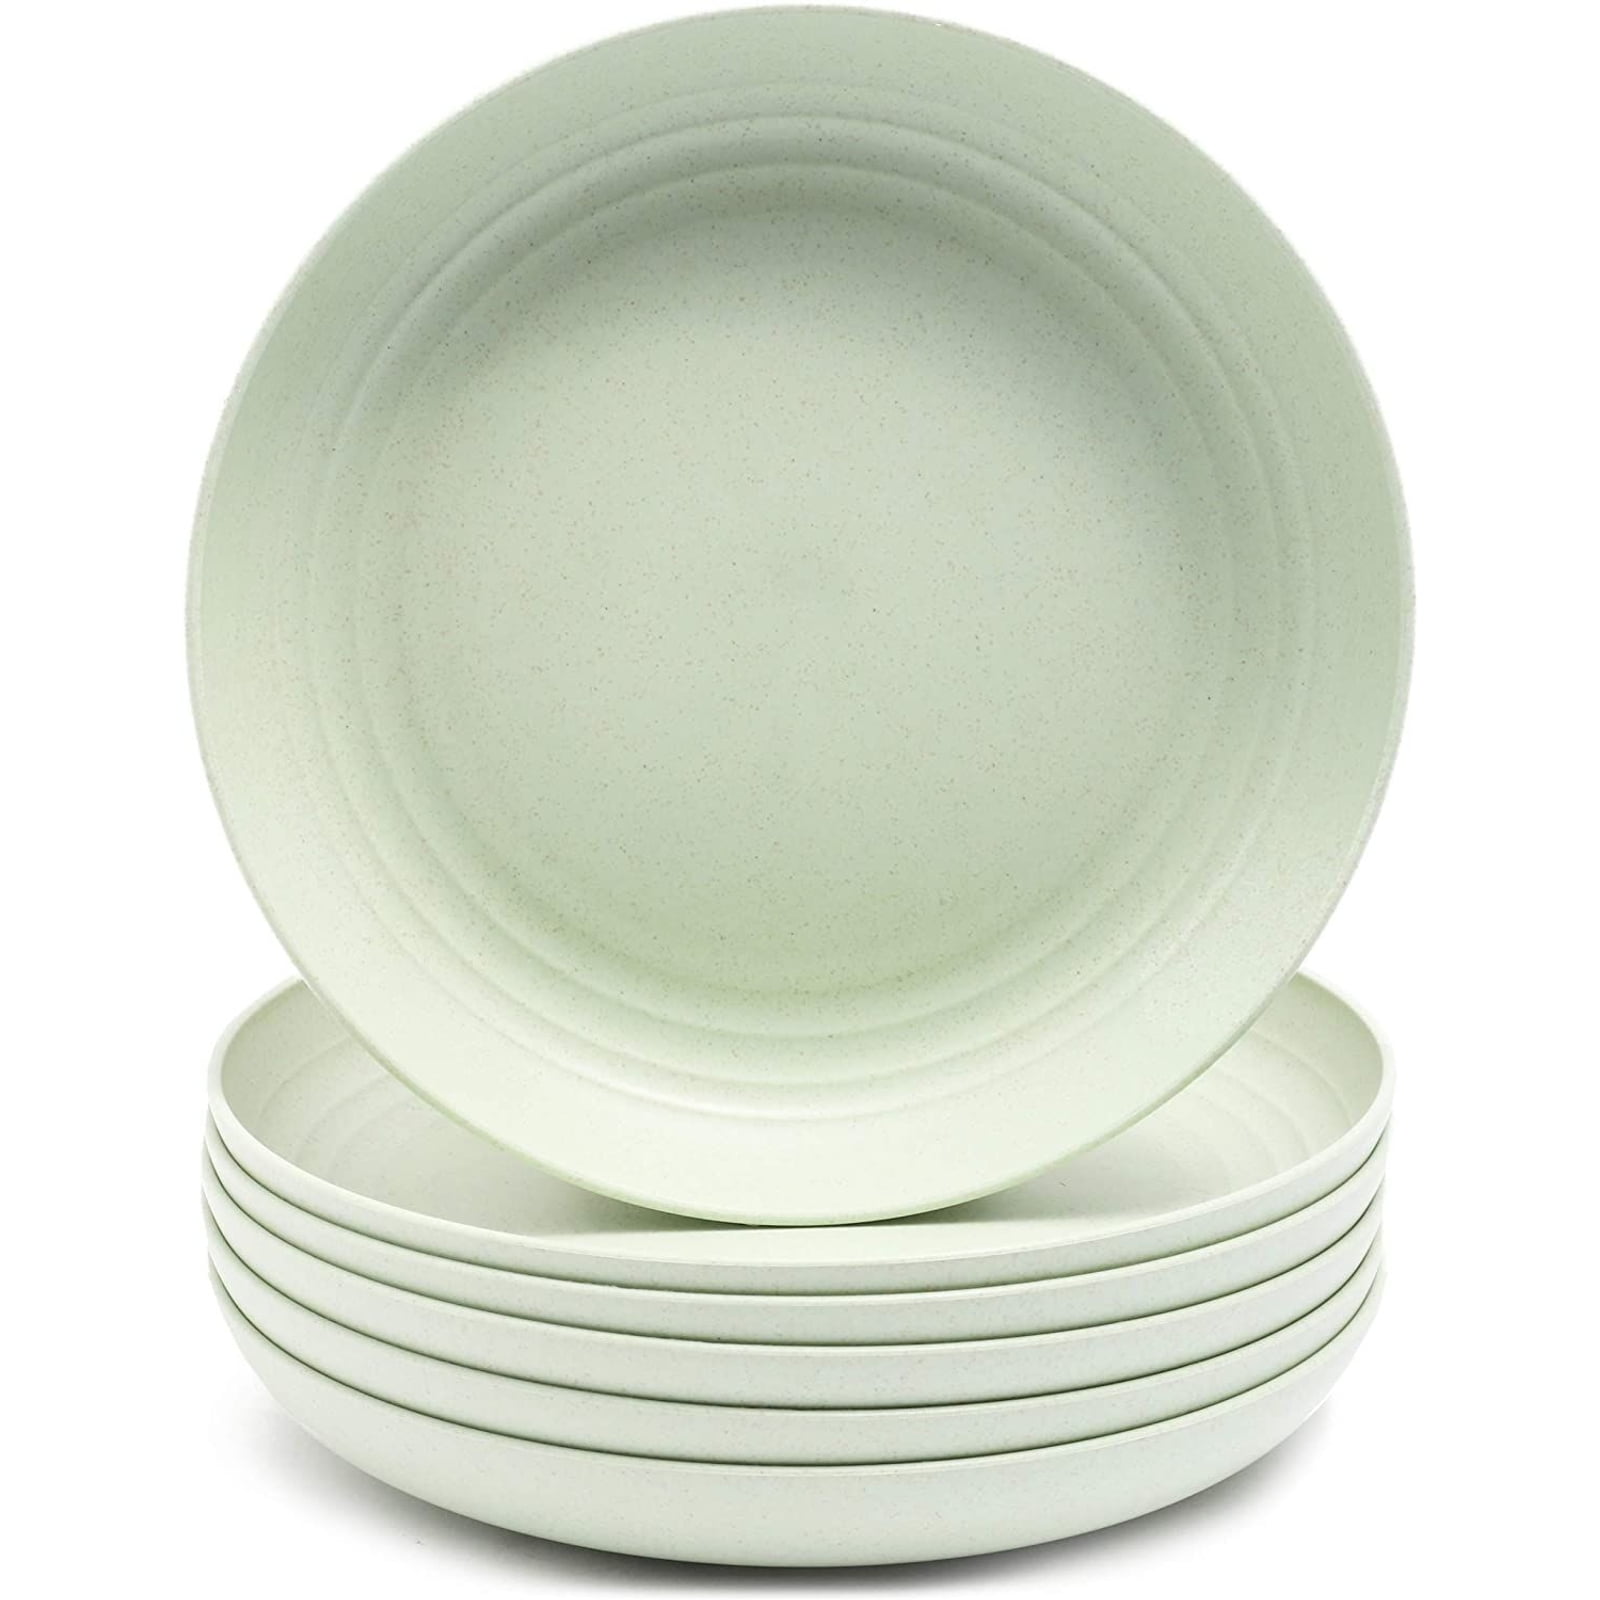 Details about   Goter 6 Inch Wheat Straw Appetizer Dinner Plates Small Serving Cake Dessert Set 